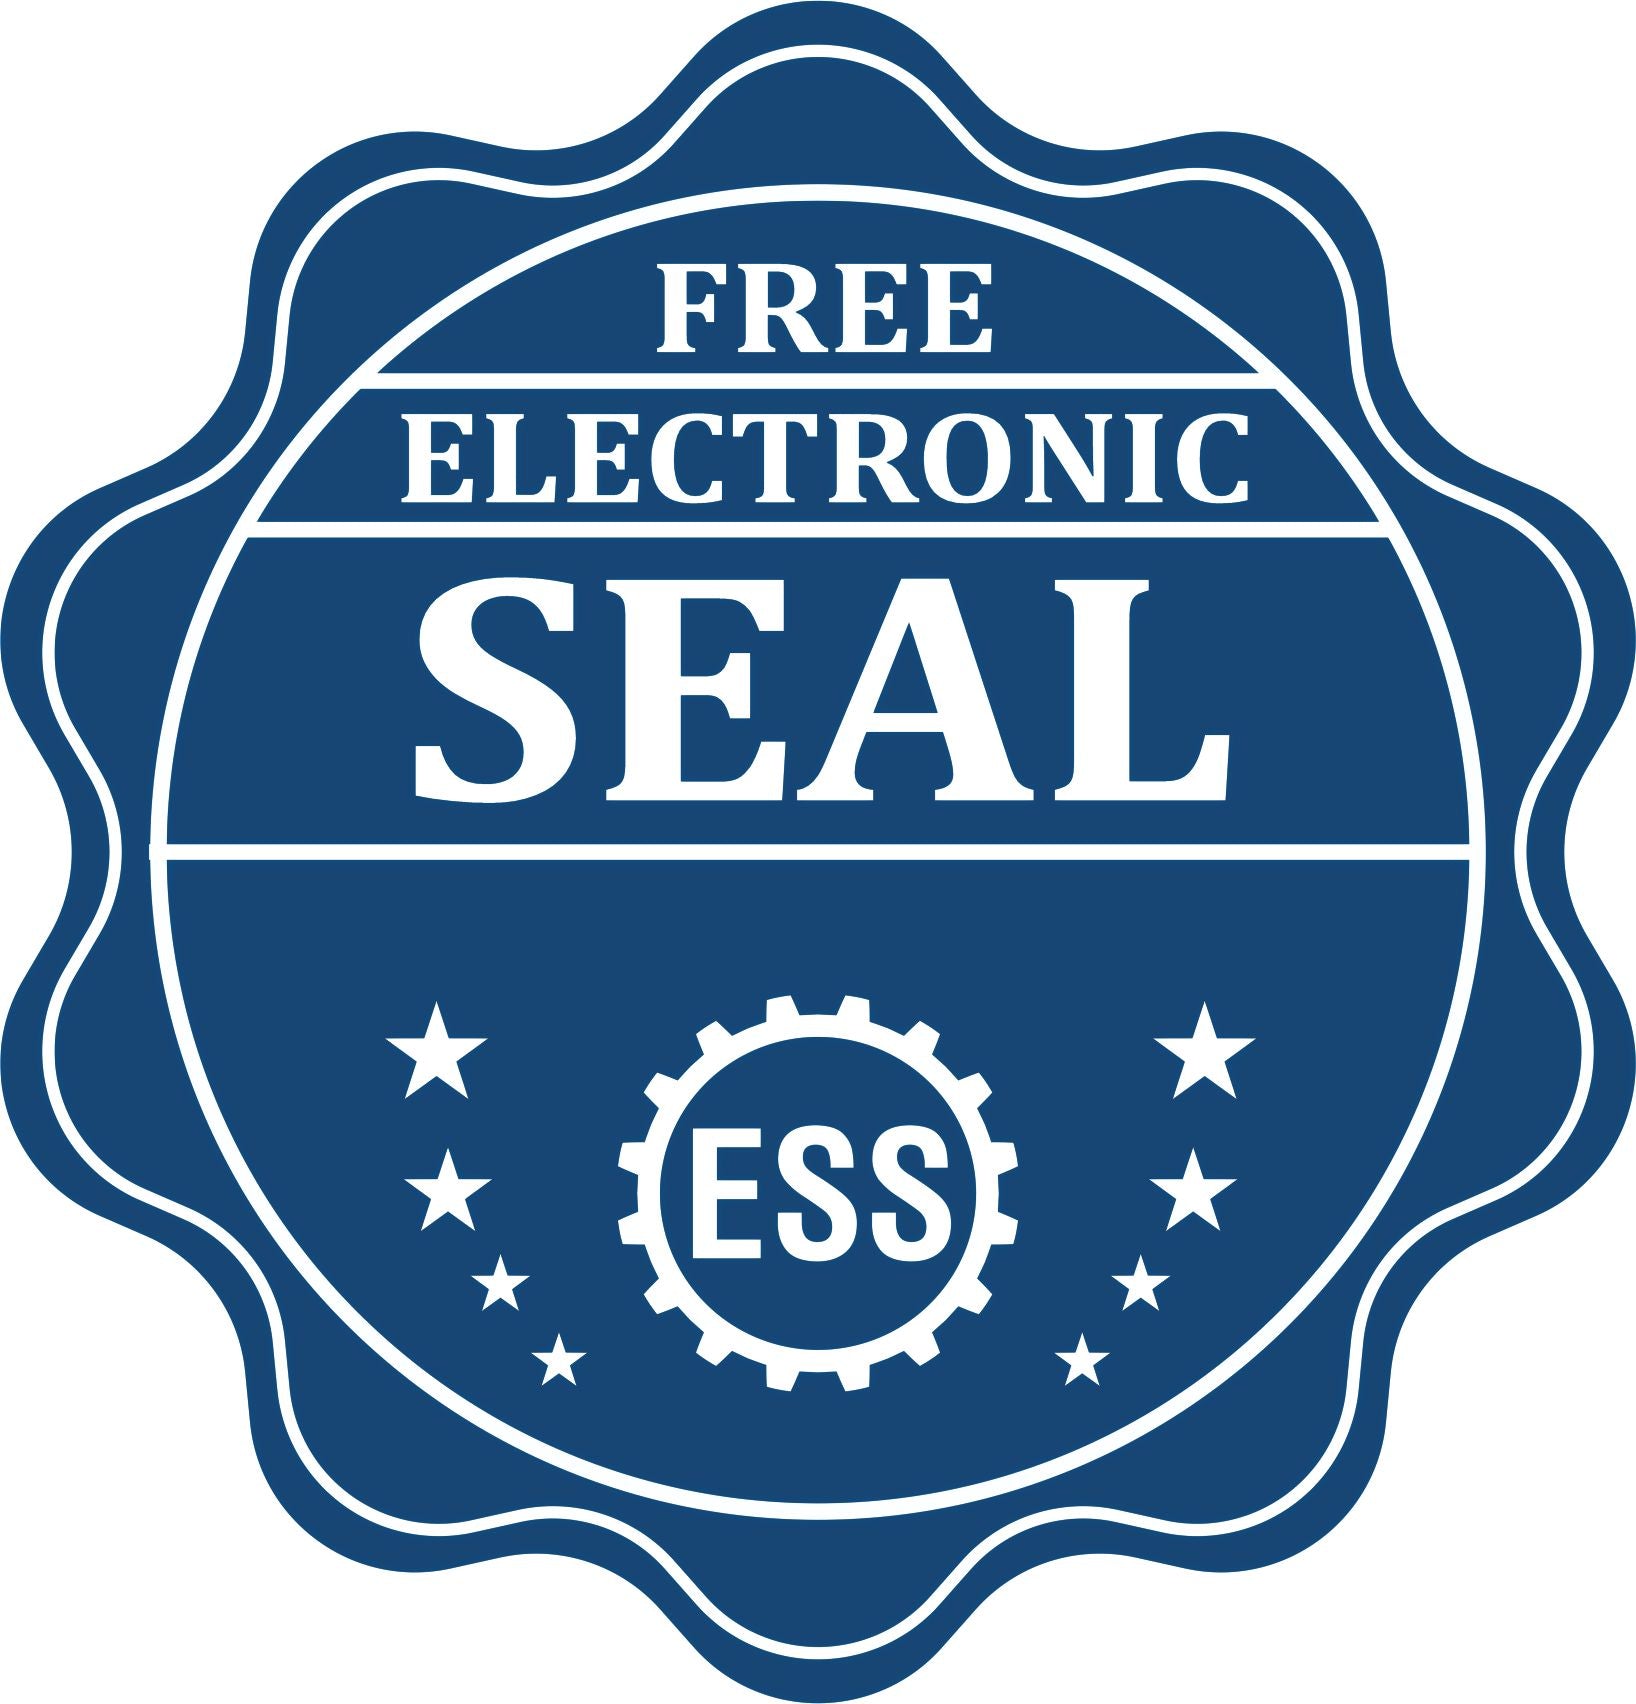 A badge showing a free electronic seal for the Long Reach New Jersey PE Seal with stars and the ESS gear on the emblem.